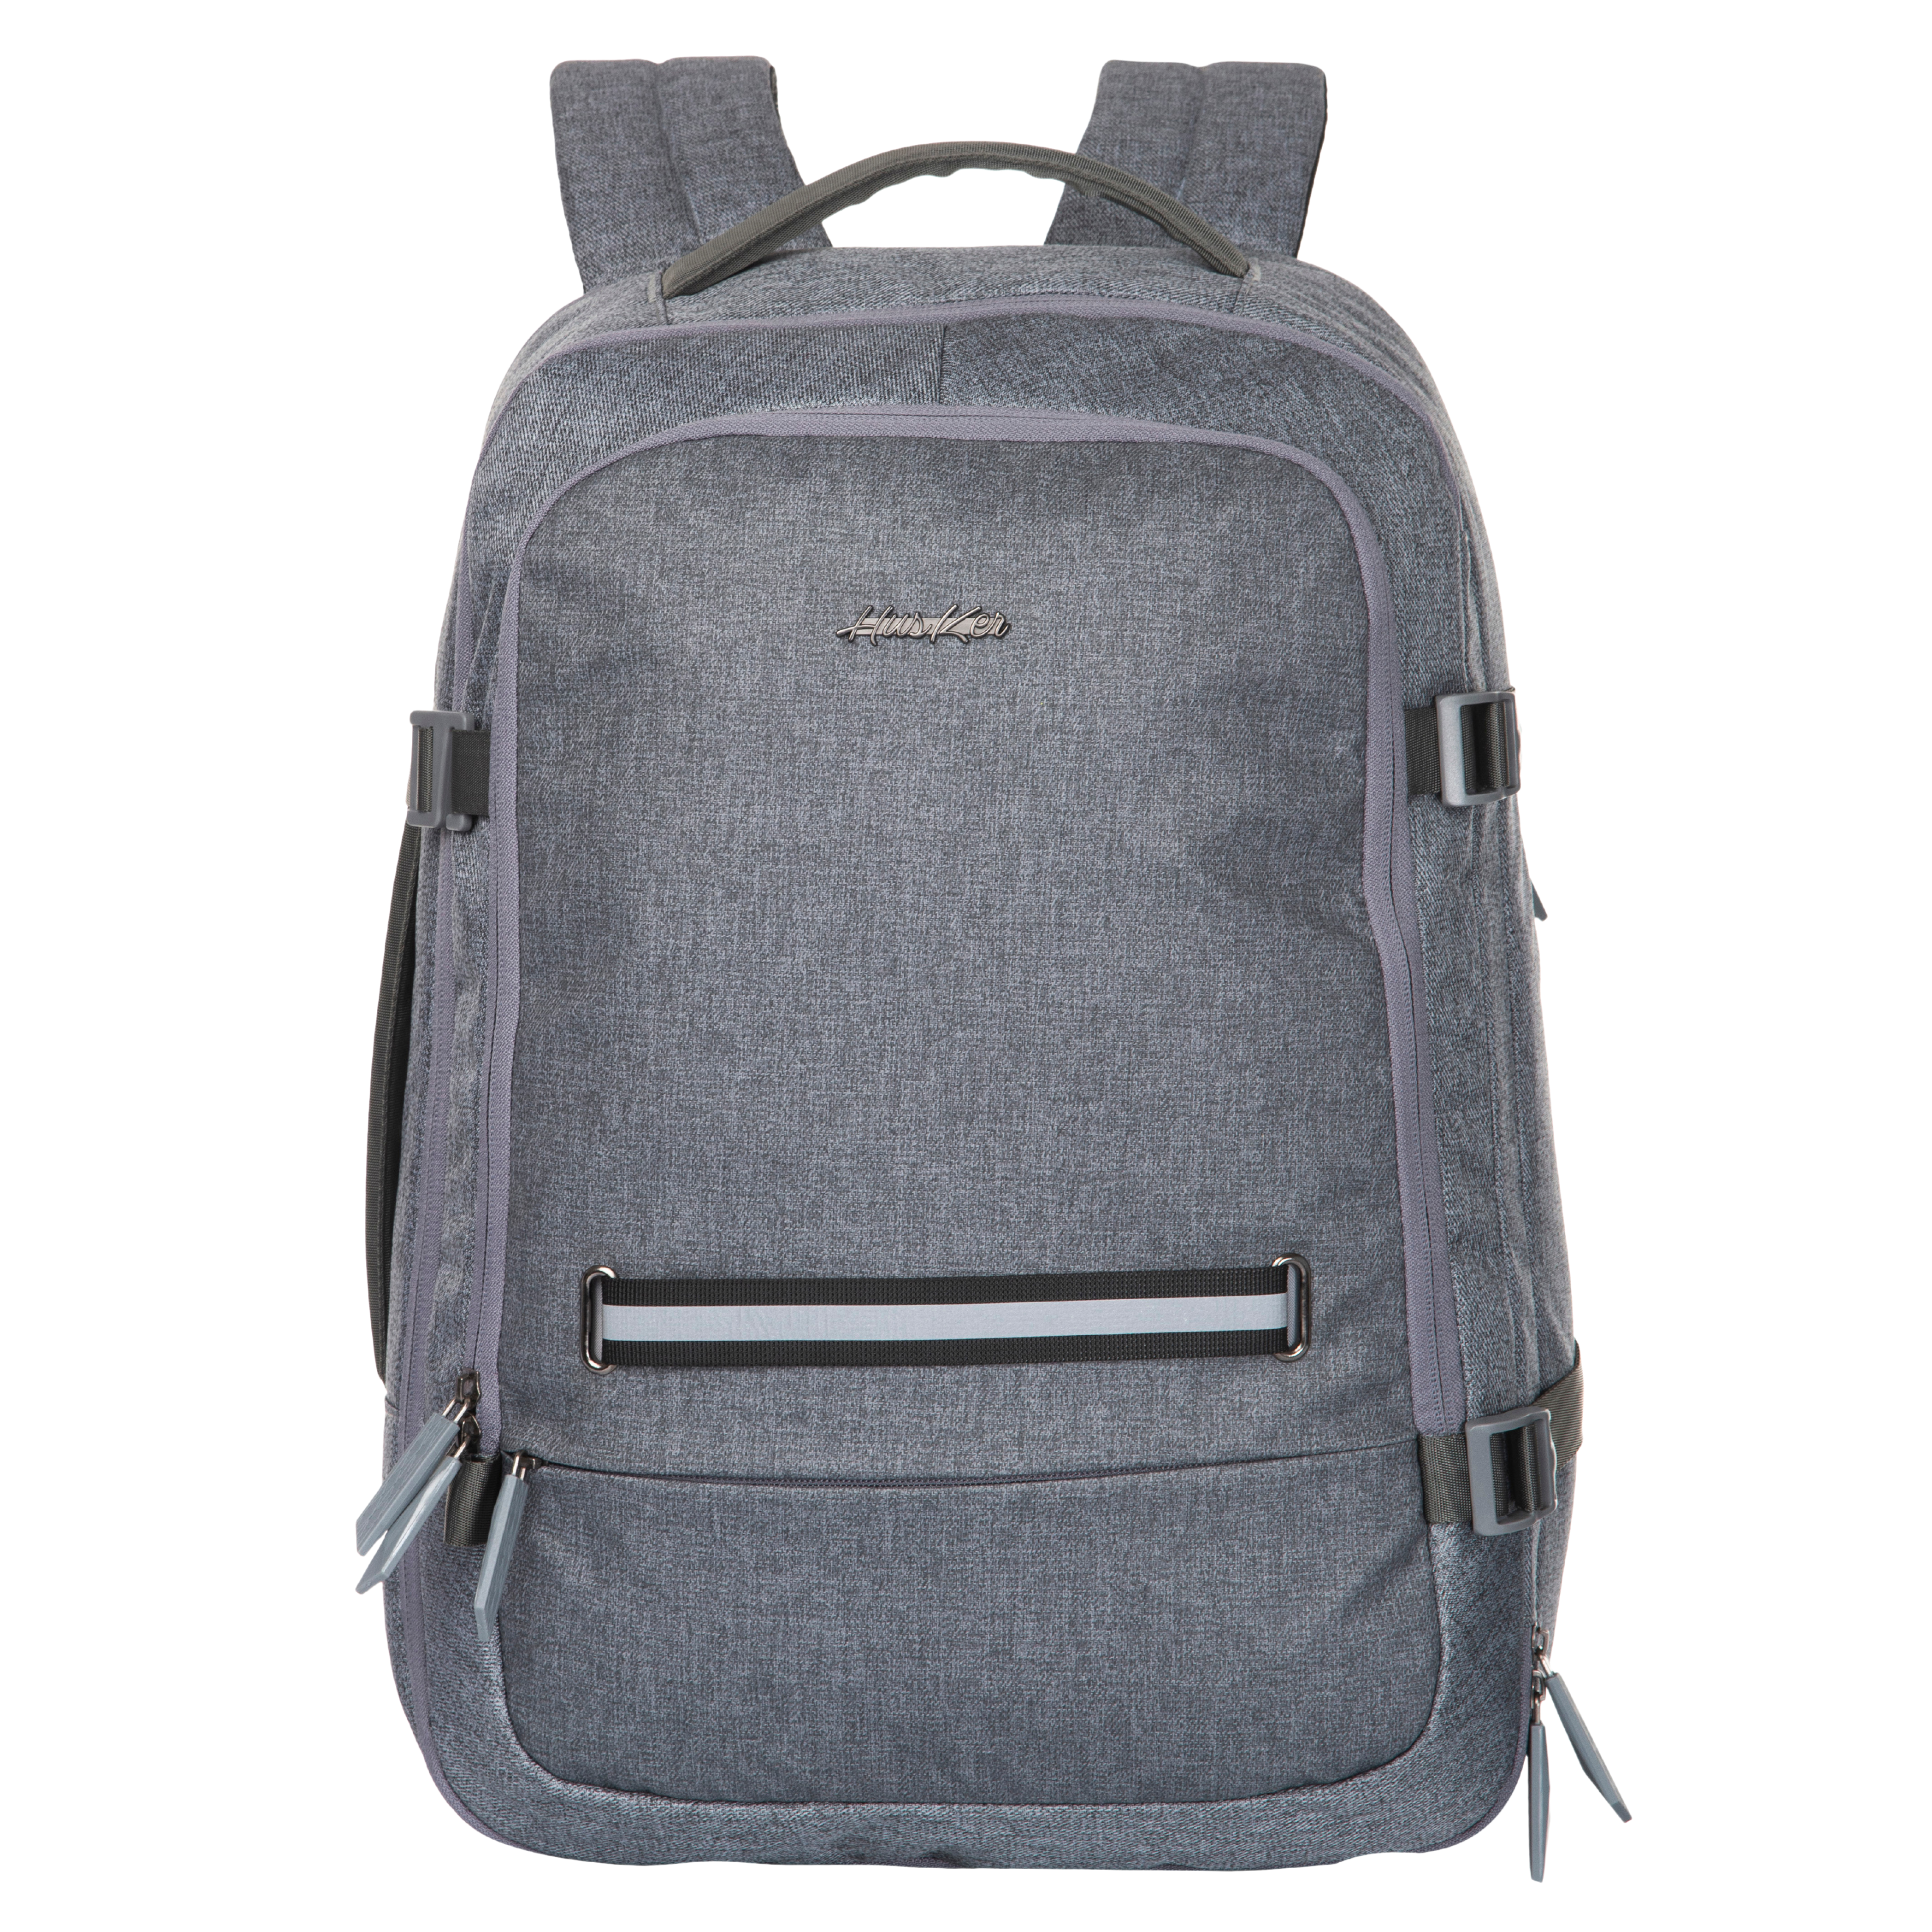 Husker TrailWalker Luggage Travel Backpack with Laptop Compartment  Grey   Hindustan Tools Everest Industrial Corporation